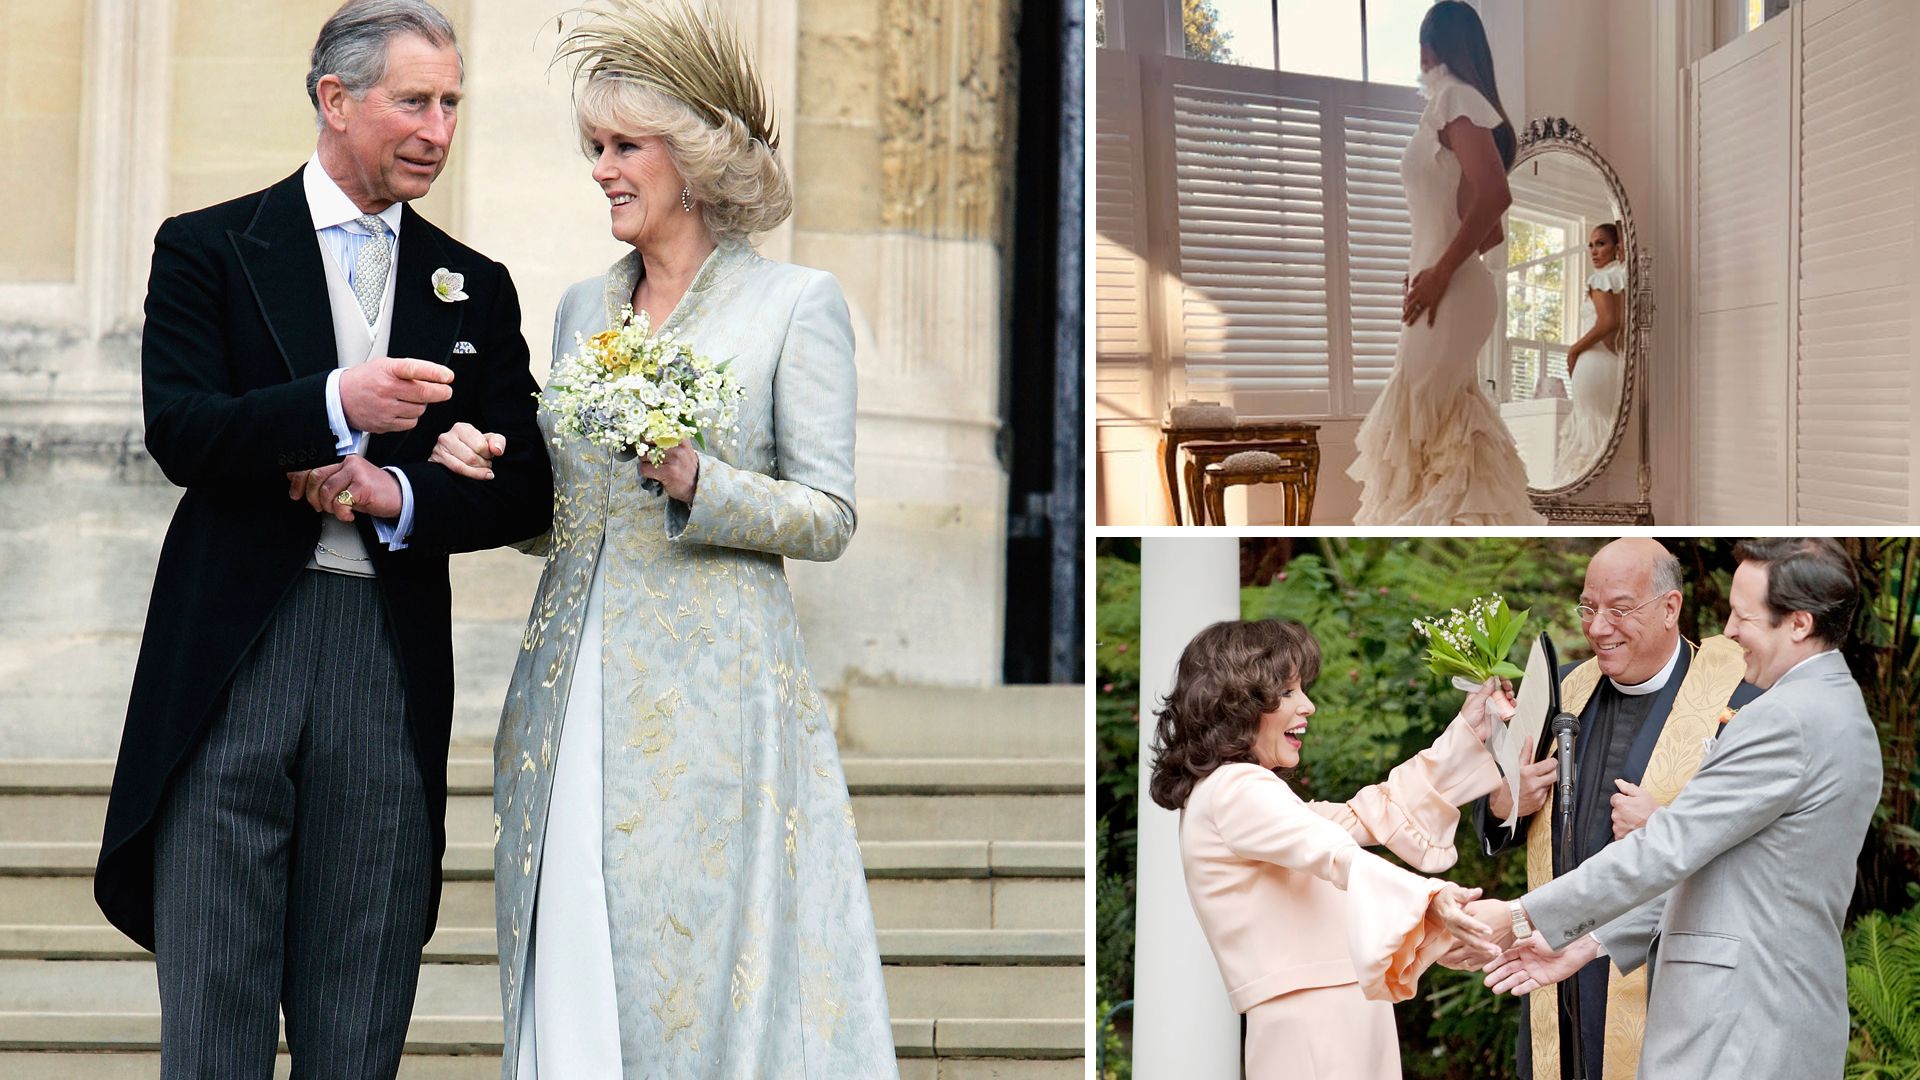 Nontraditional Celebrity Wedding Dresses: Celebrities Who Didn't